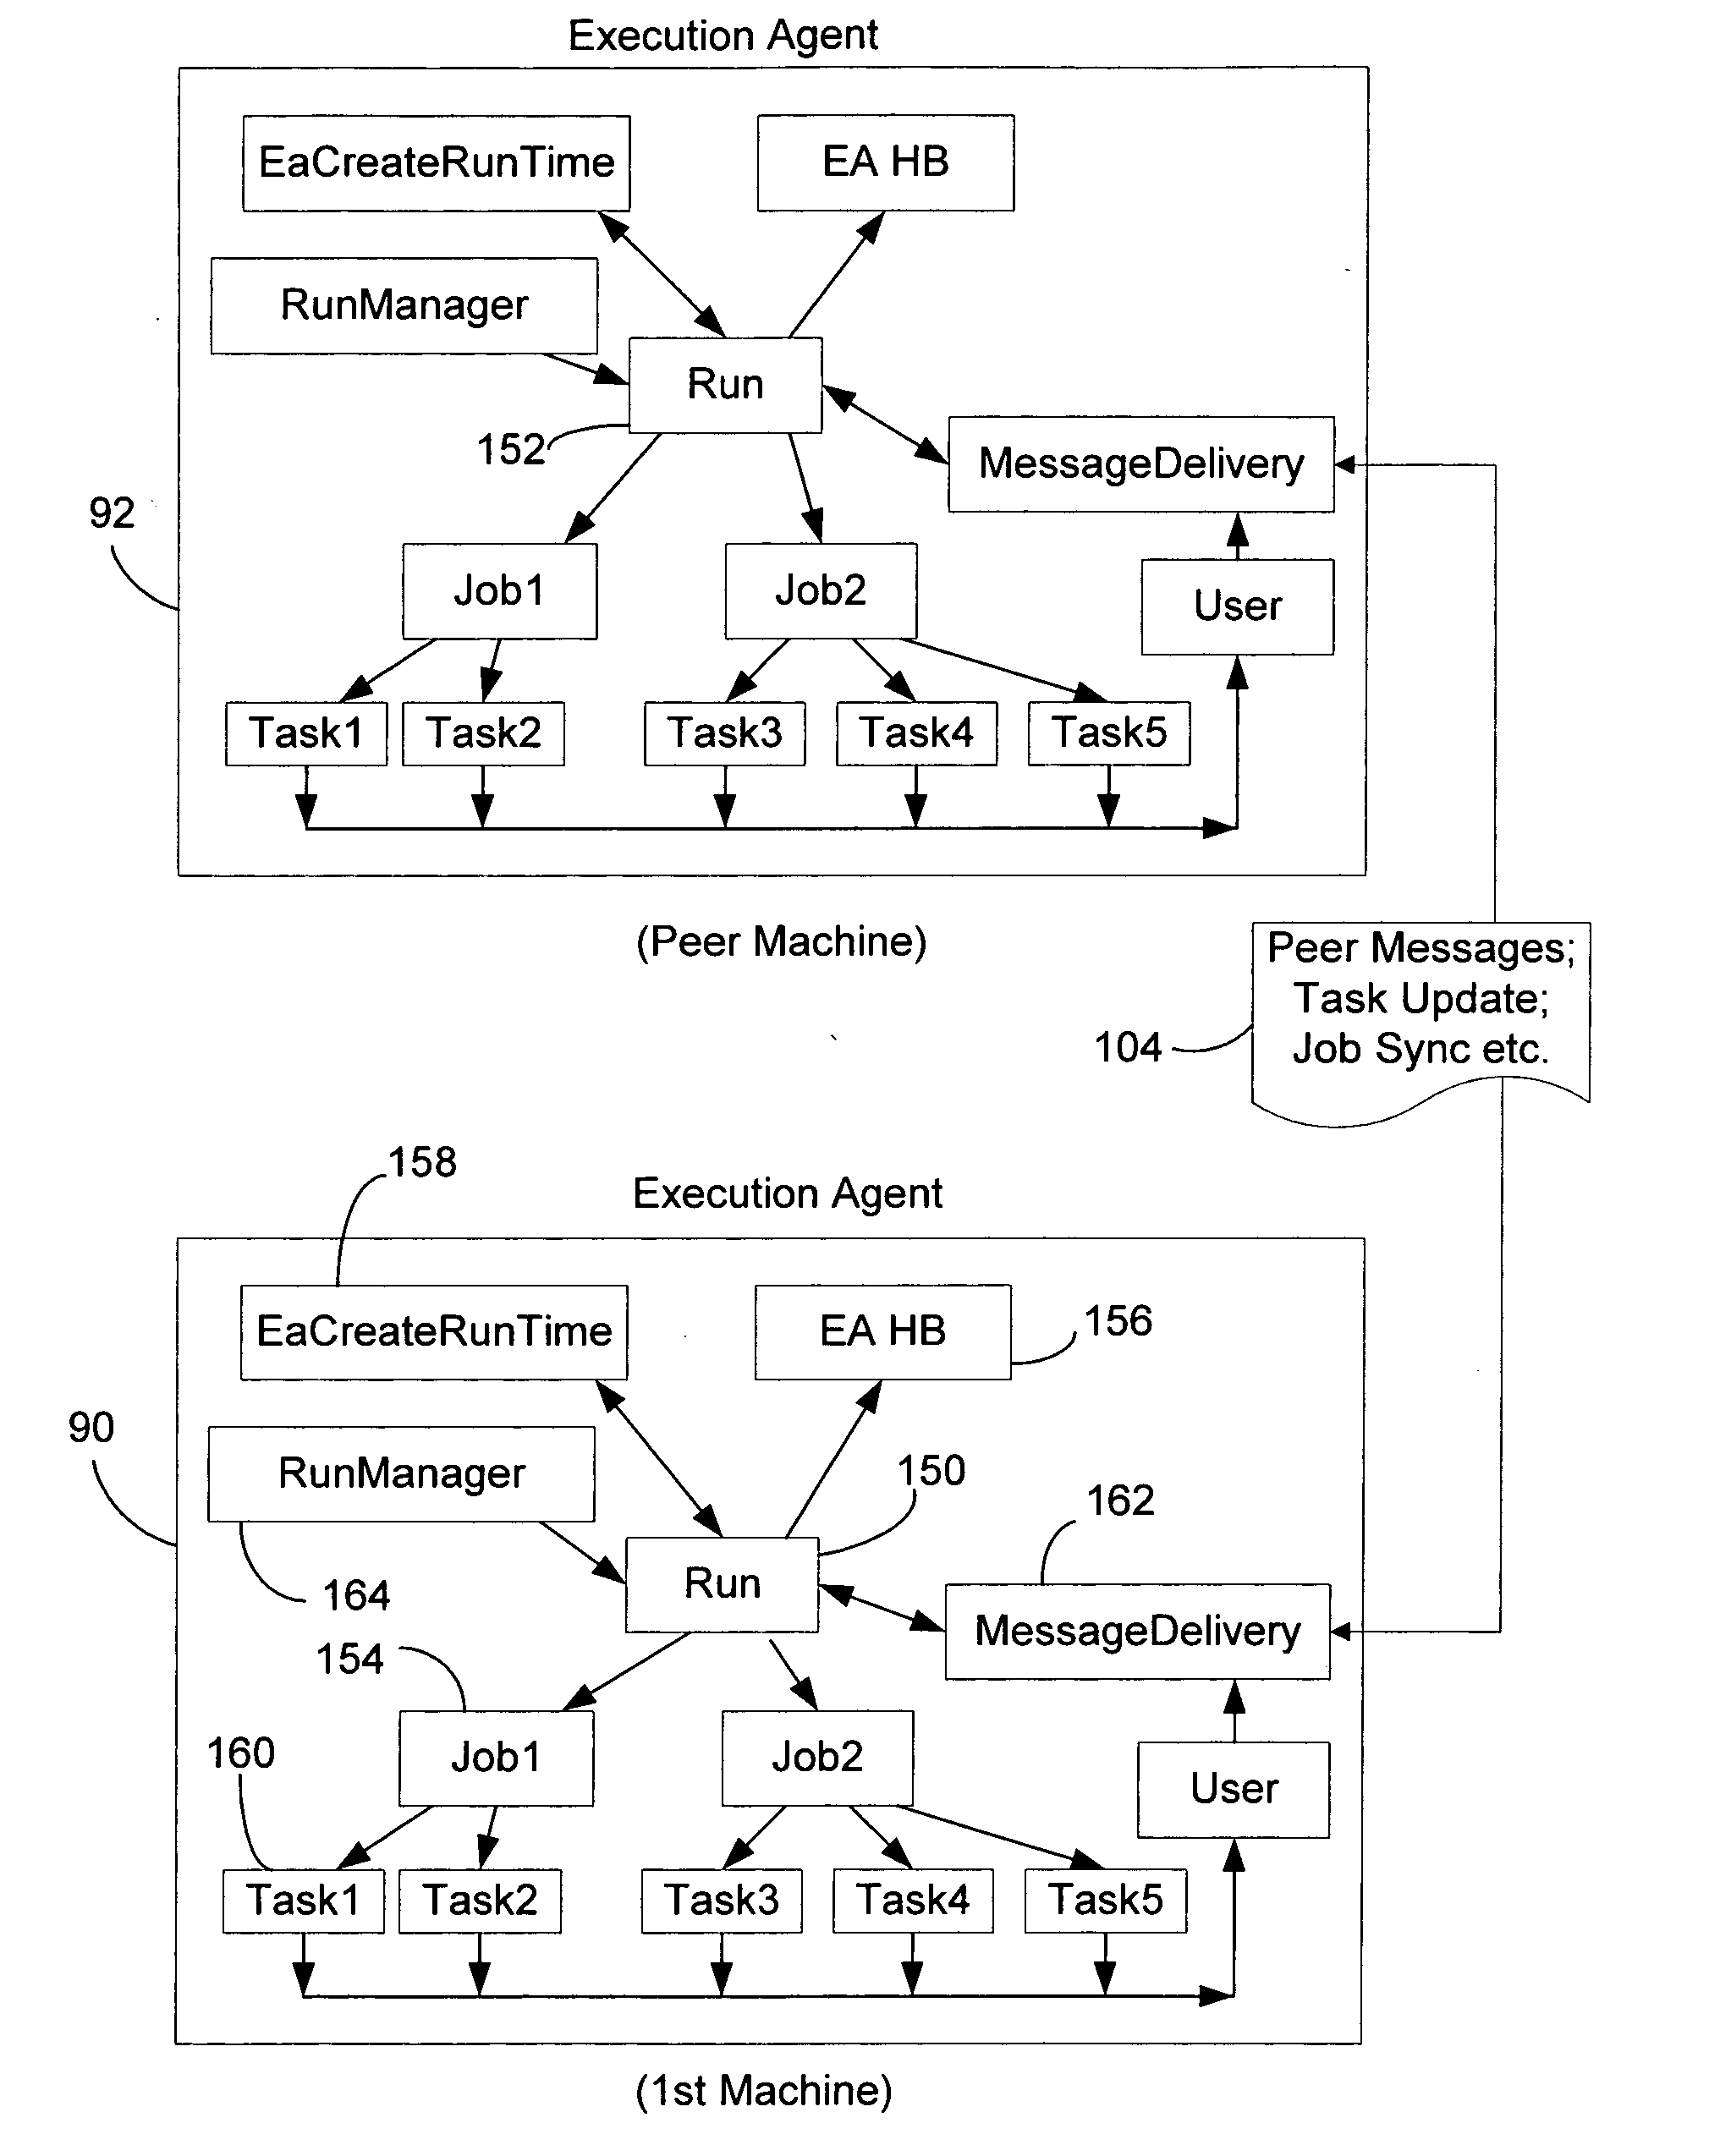 System and method for dynamic cooperative distributed execution of computer tasks without a centralized controller